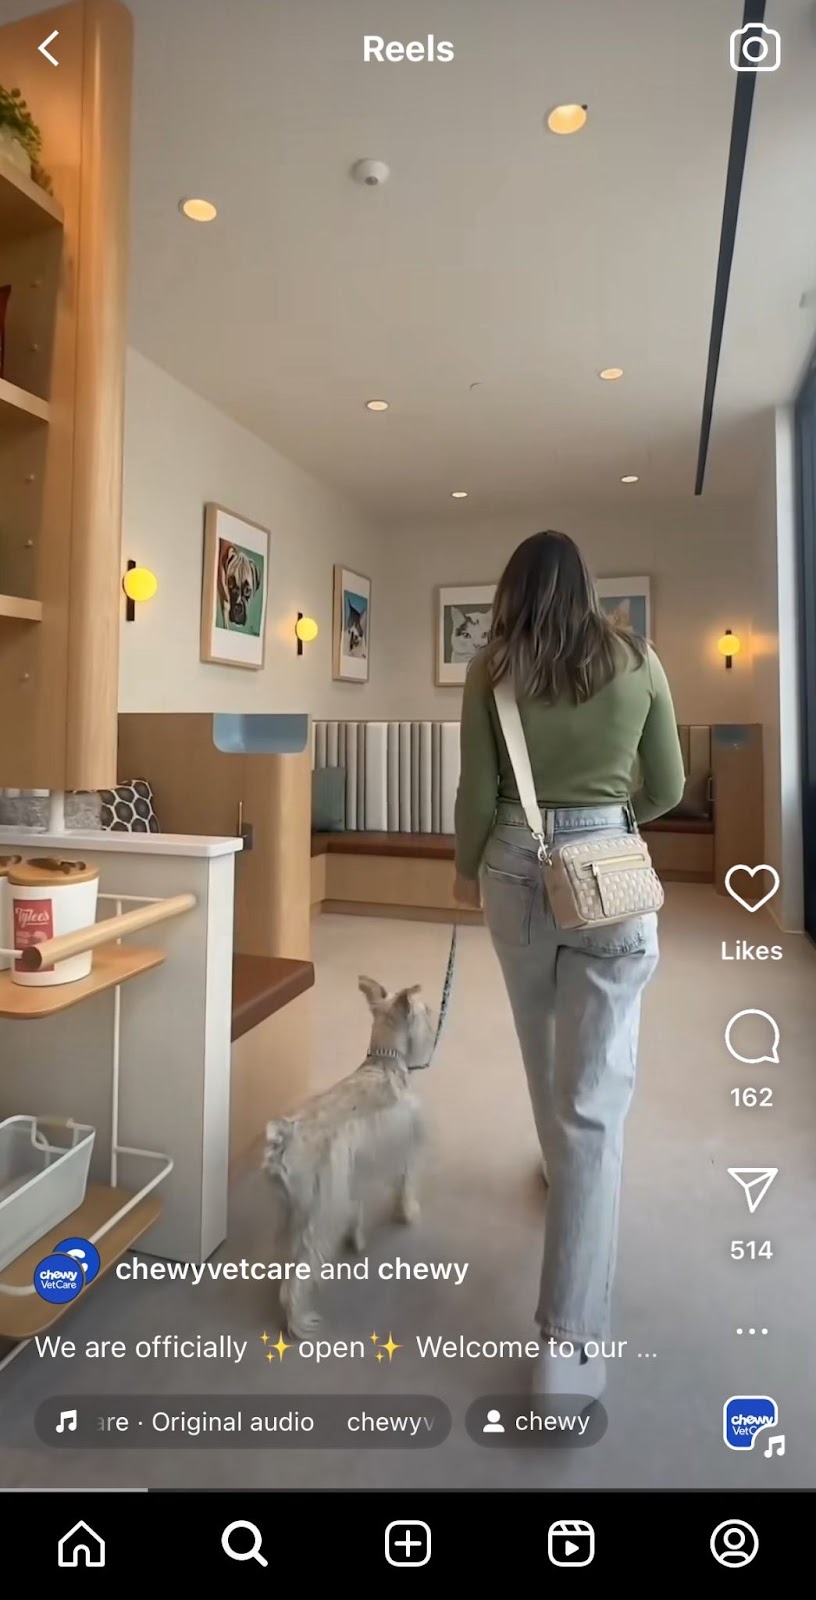 Instagram Reel from Chewy's business account.